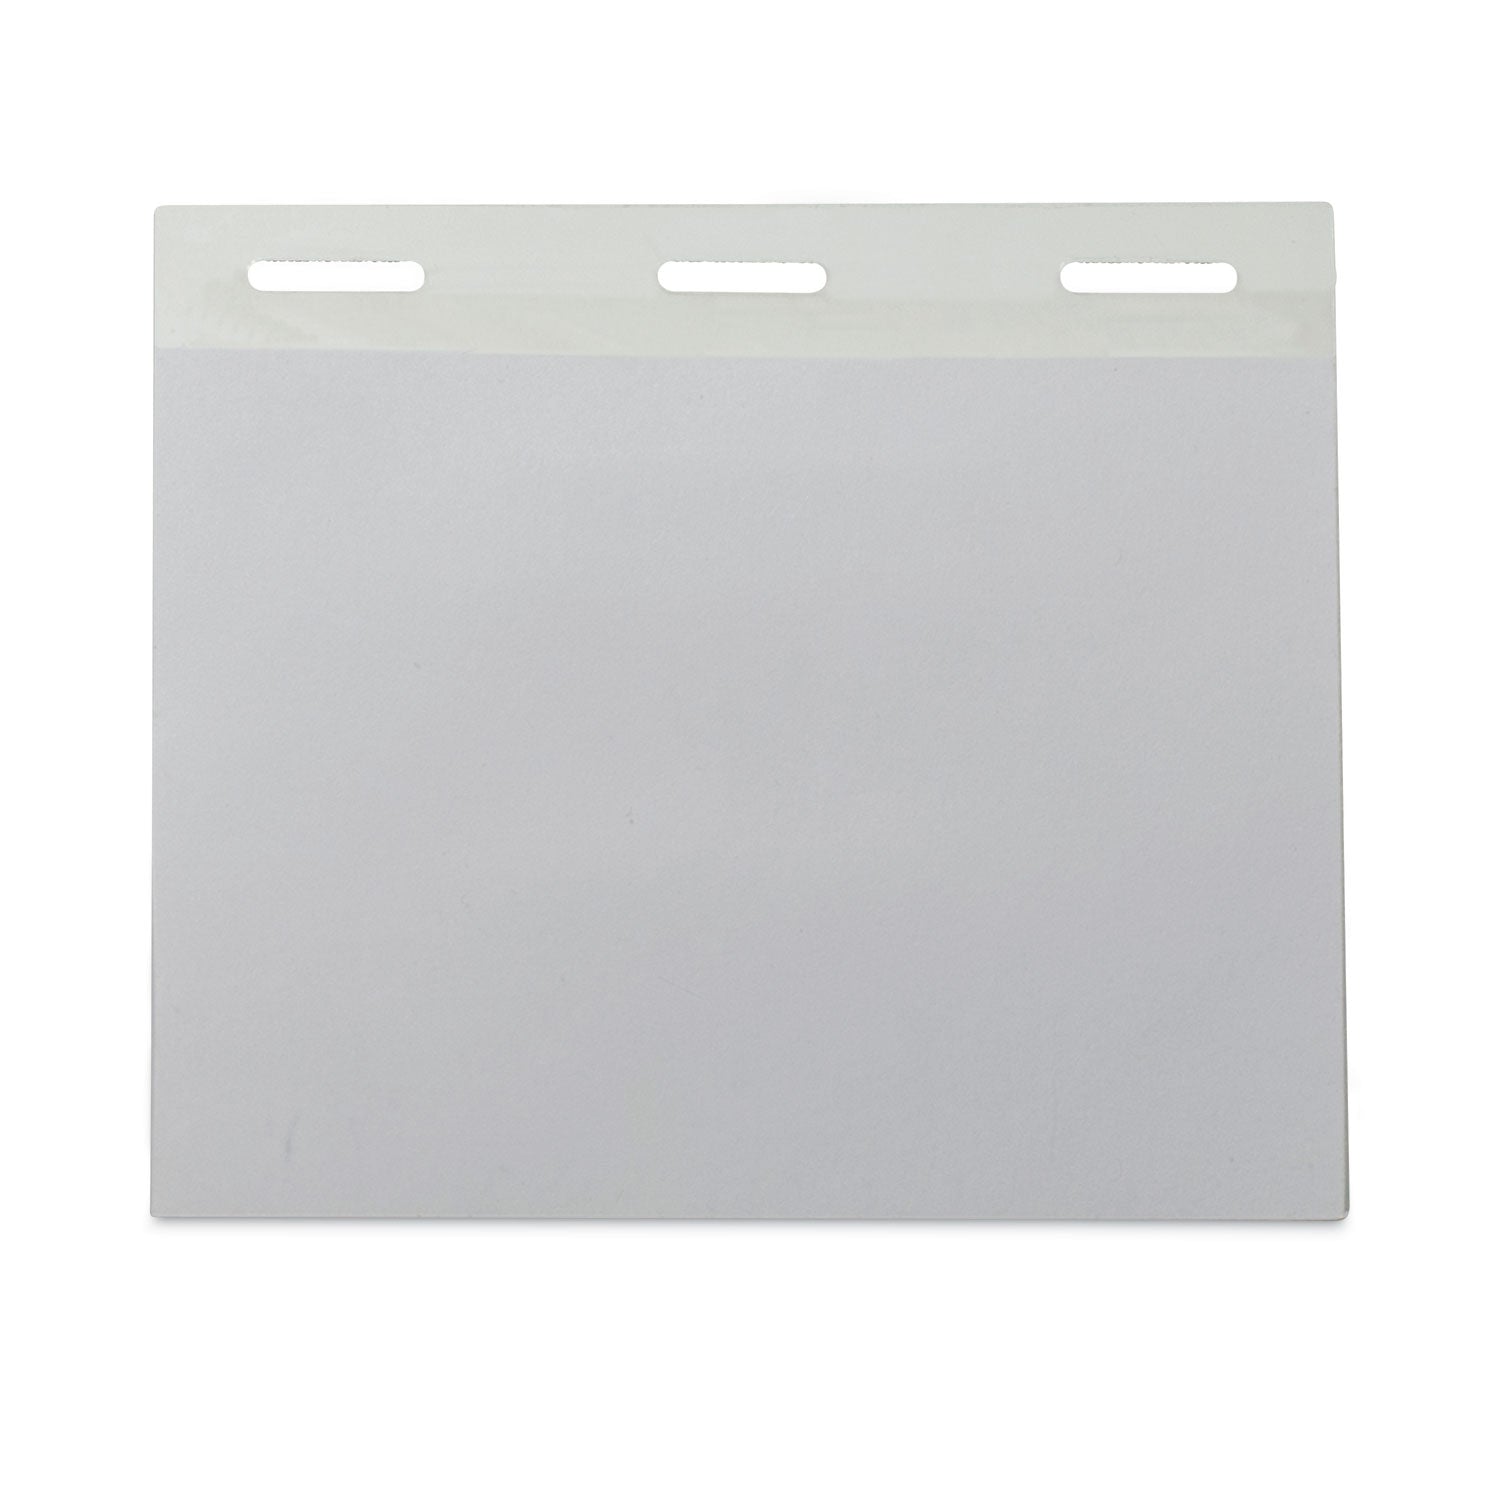 self-laminating-magnetic-style-name-badge-holder-kit-3-x-4-clear-20-box_cli92843 - 2